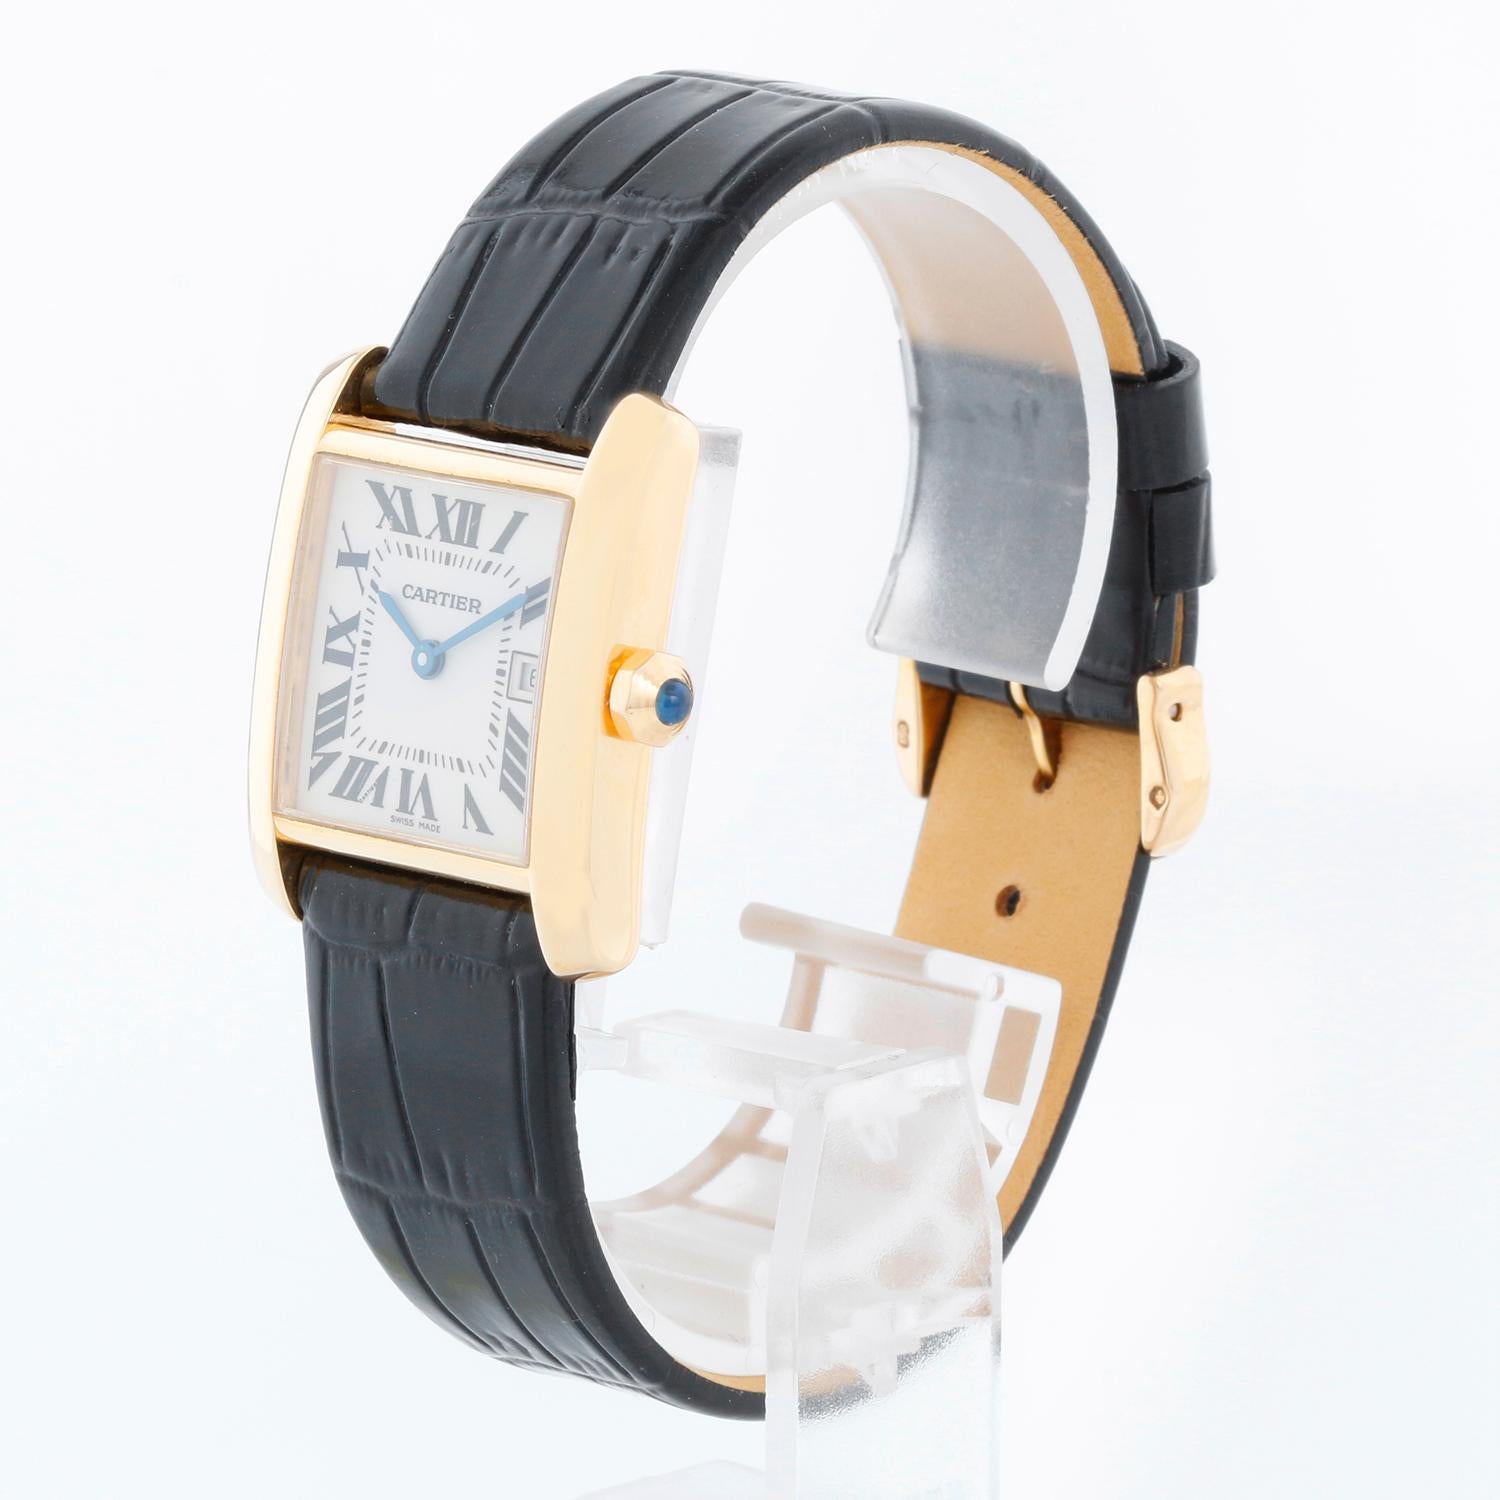 Cartier Tank Francaise Midsize 18k Yellow Gold Men's/Ladies Watch W50014N2 - Quartz. 18k yellow gold  case; blue sapphire cabochon crown (25mm x 30mm). Ivory colored dial with black Roman numerals; date at 3 o'clock. Leather strap with gold Cartier